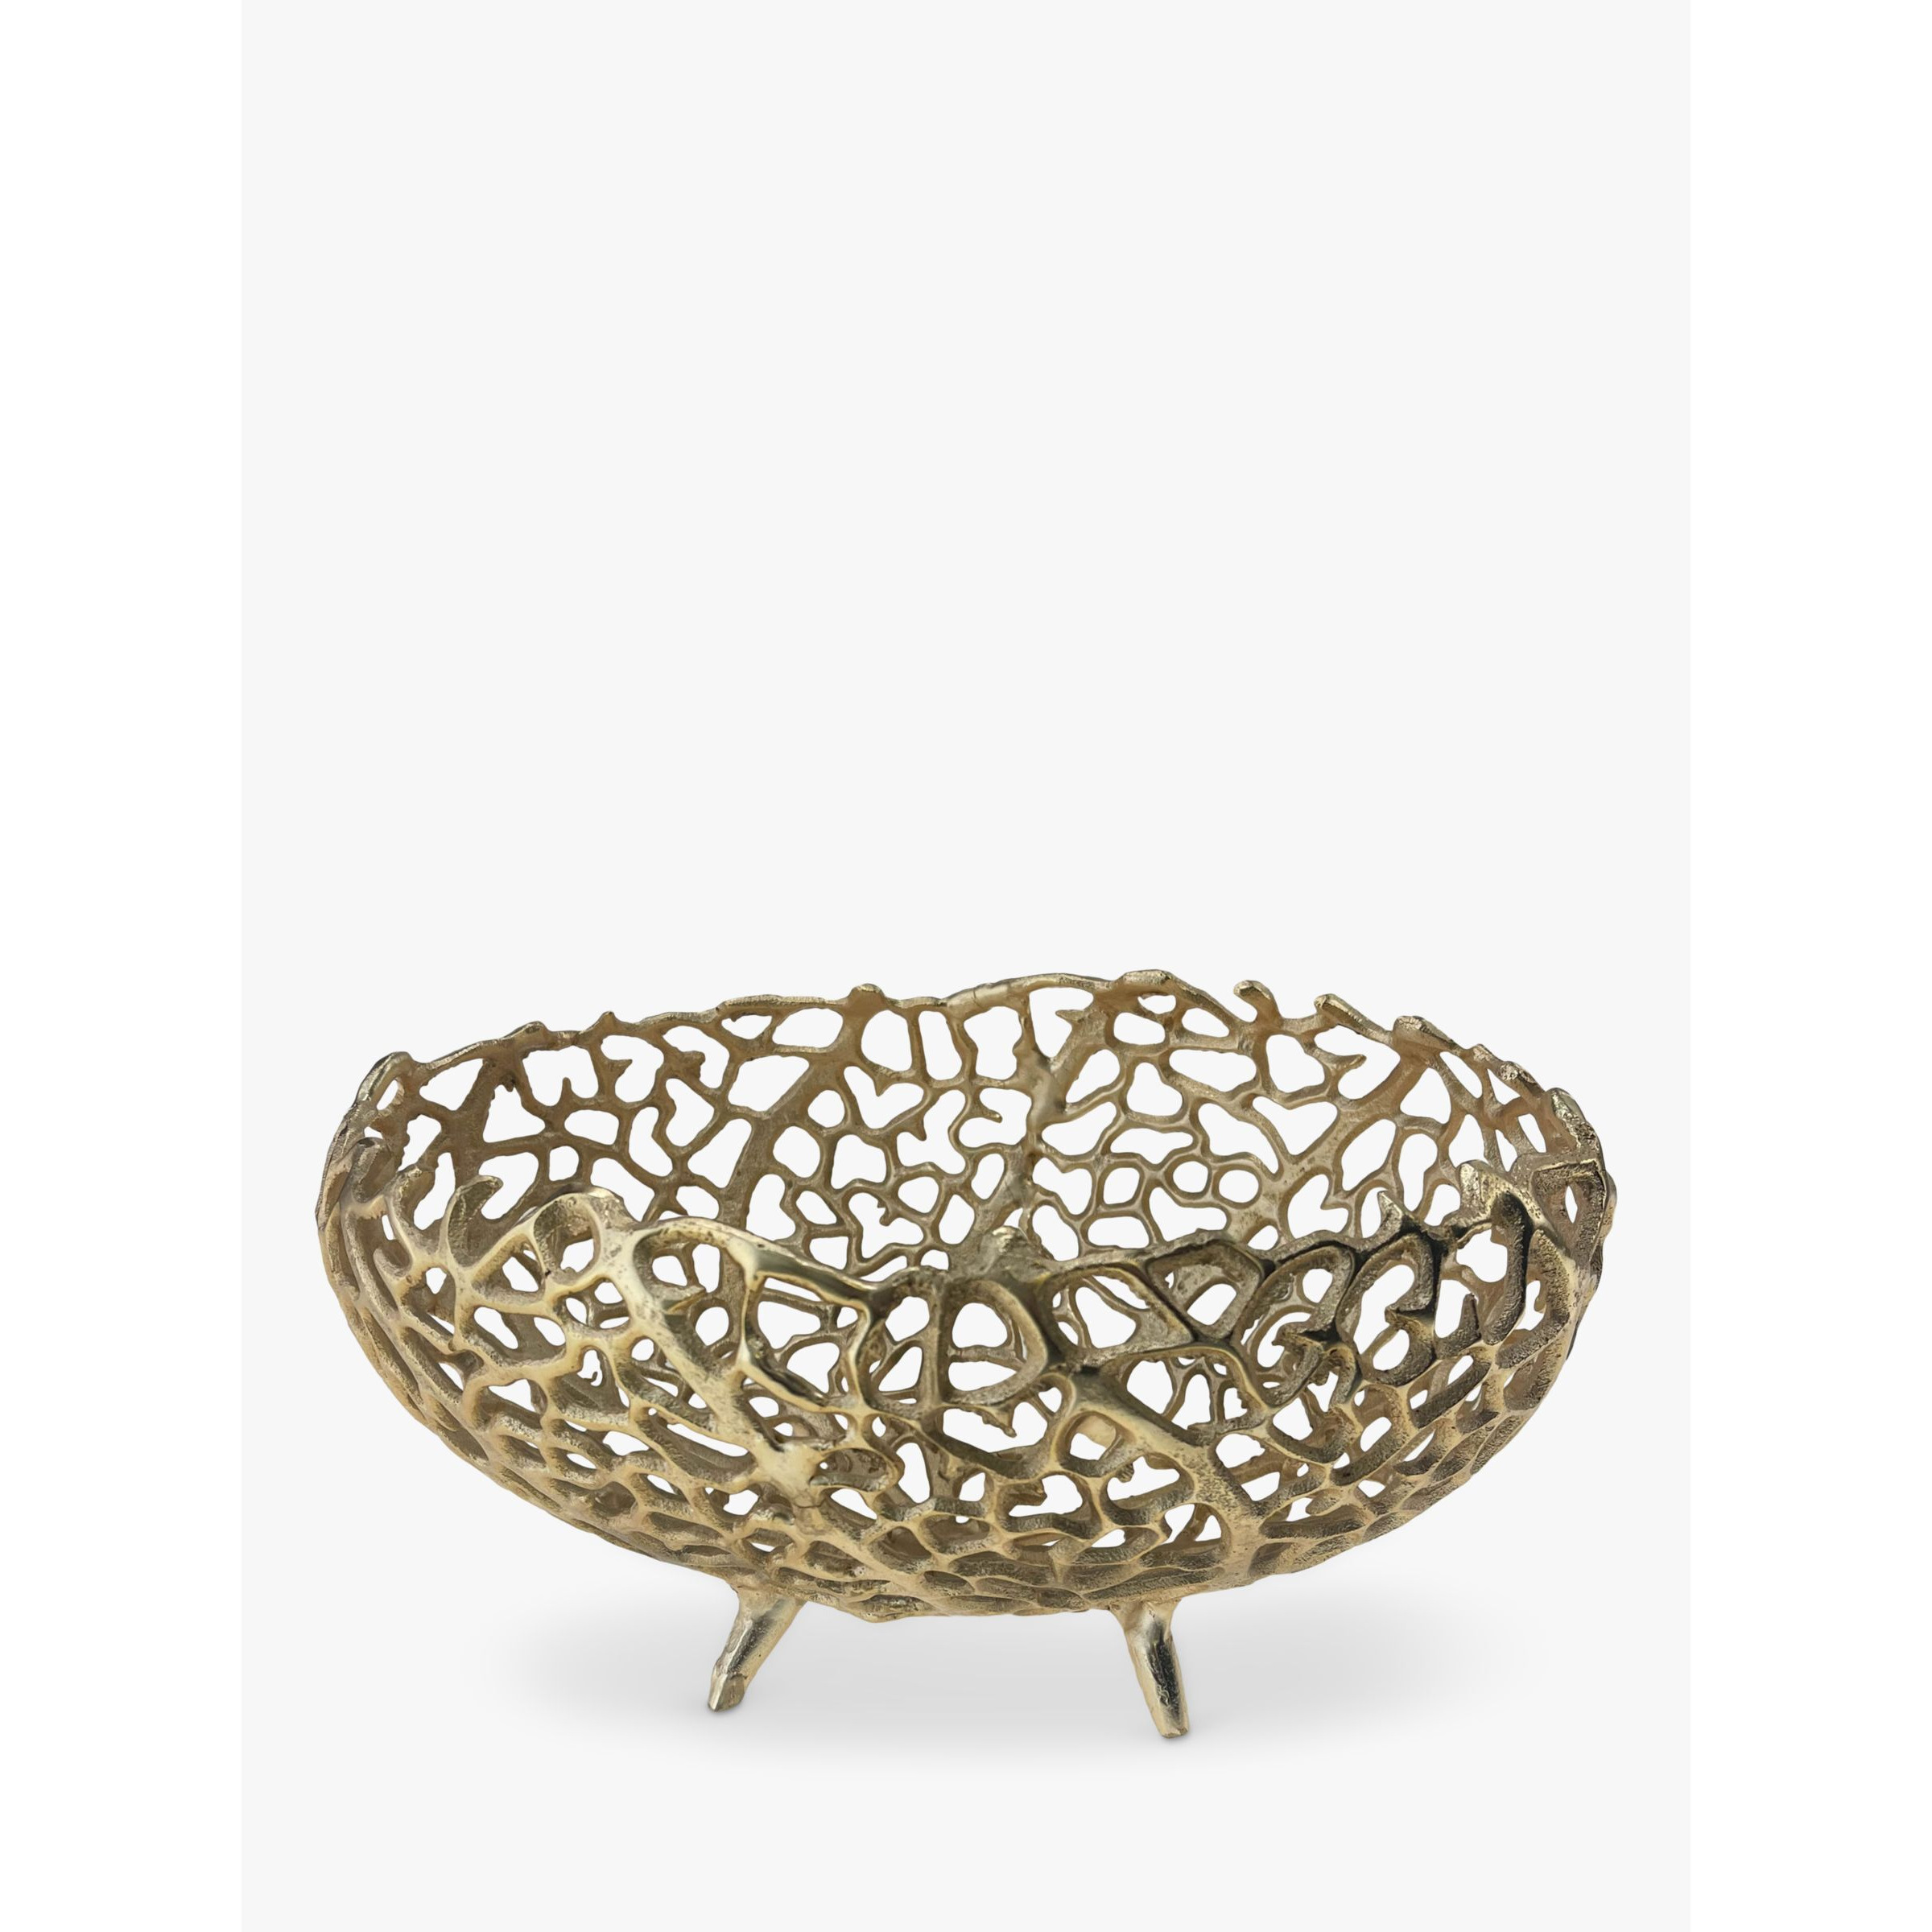 Culinary Concepts Coral Footed Metal Basket Bowl, 19cm, Gold - image 1